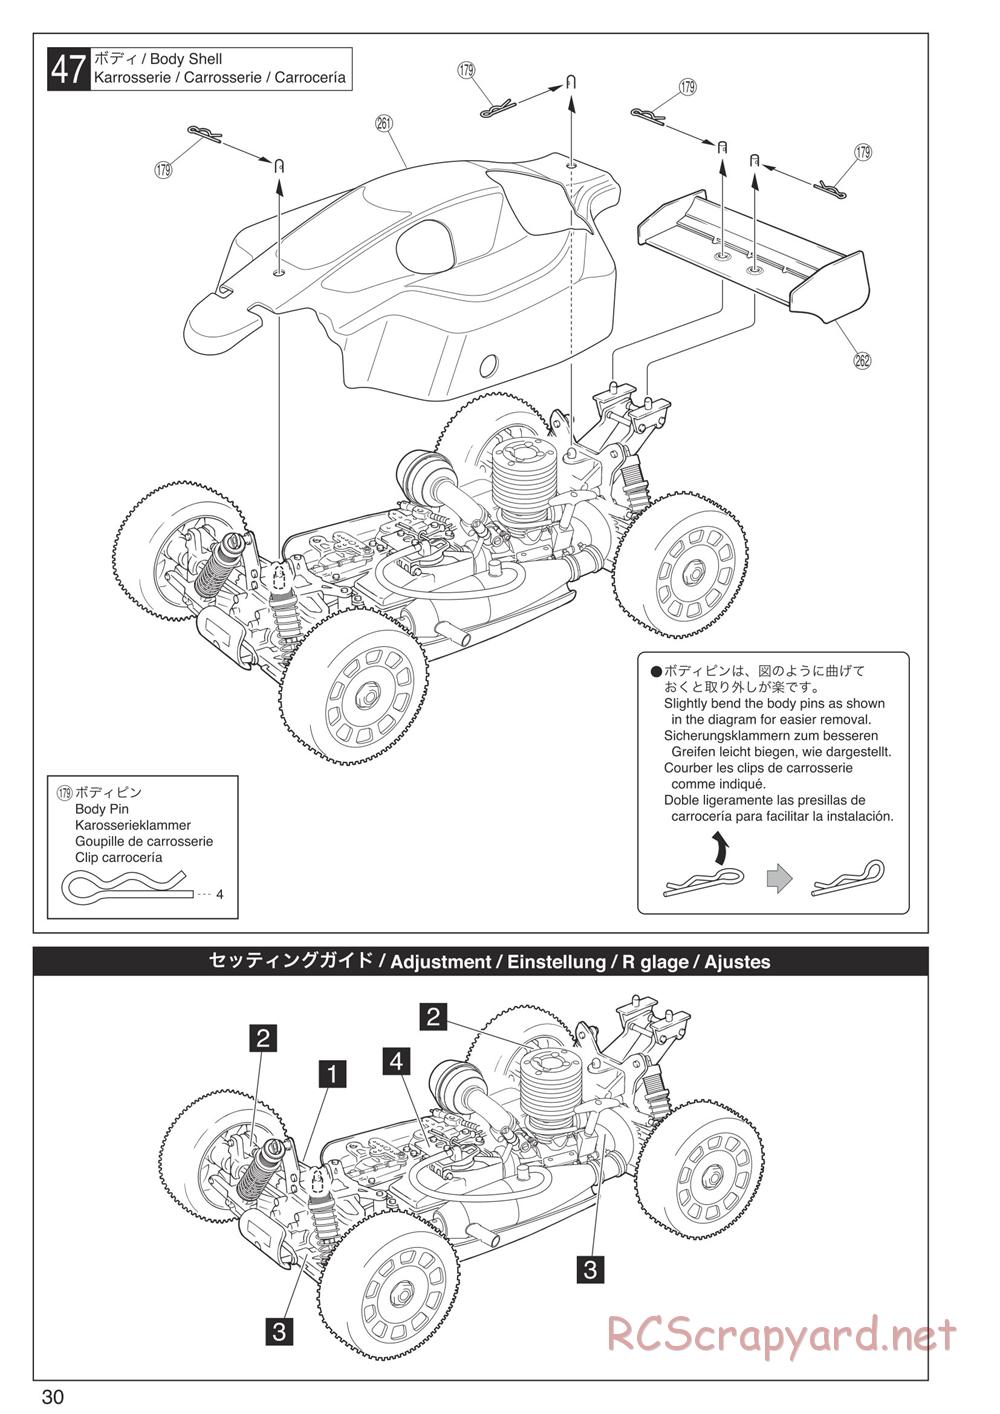 Kyosho - Inferno Neo Race Spec - Manual - Page 30